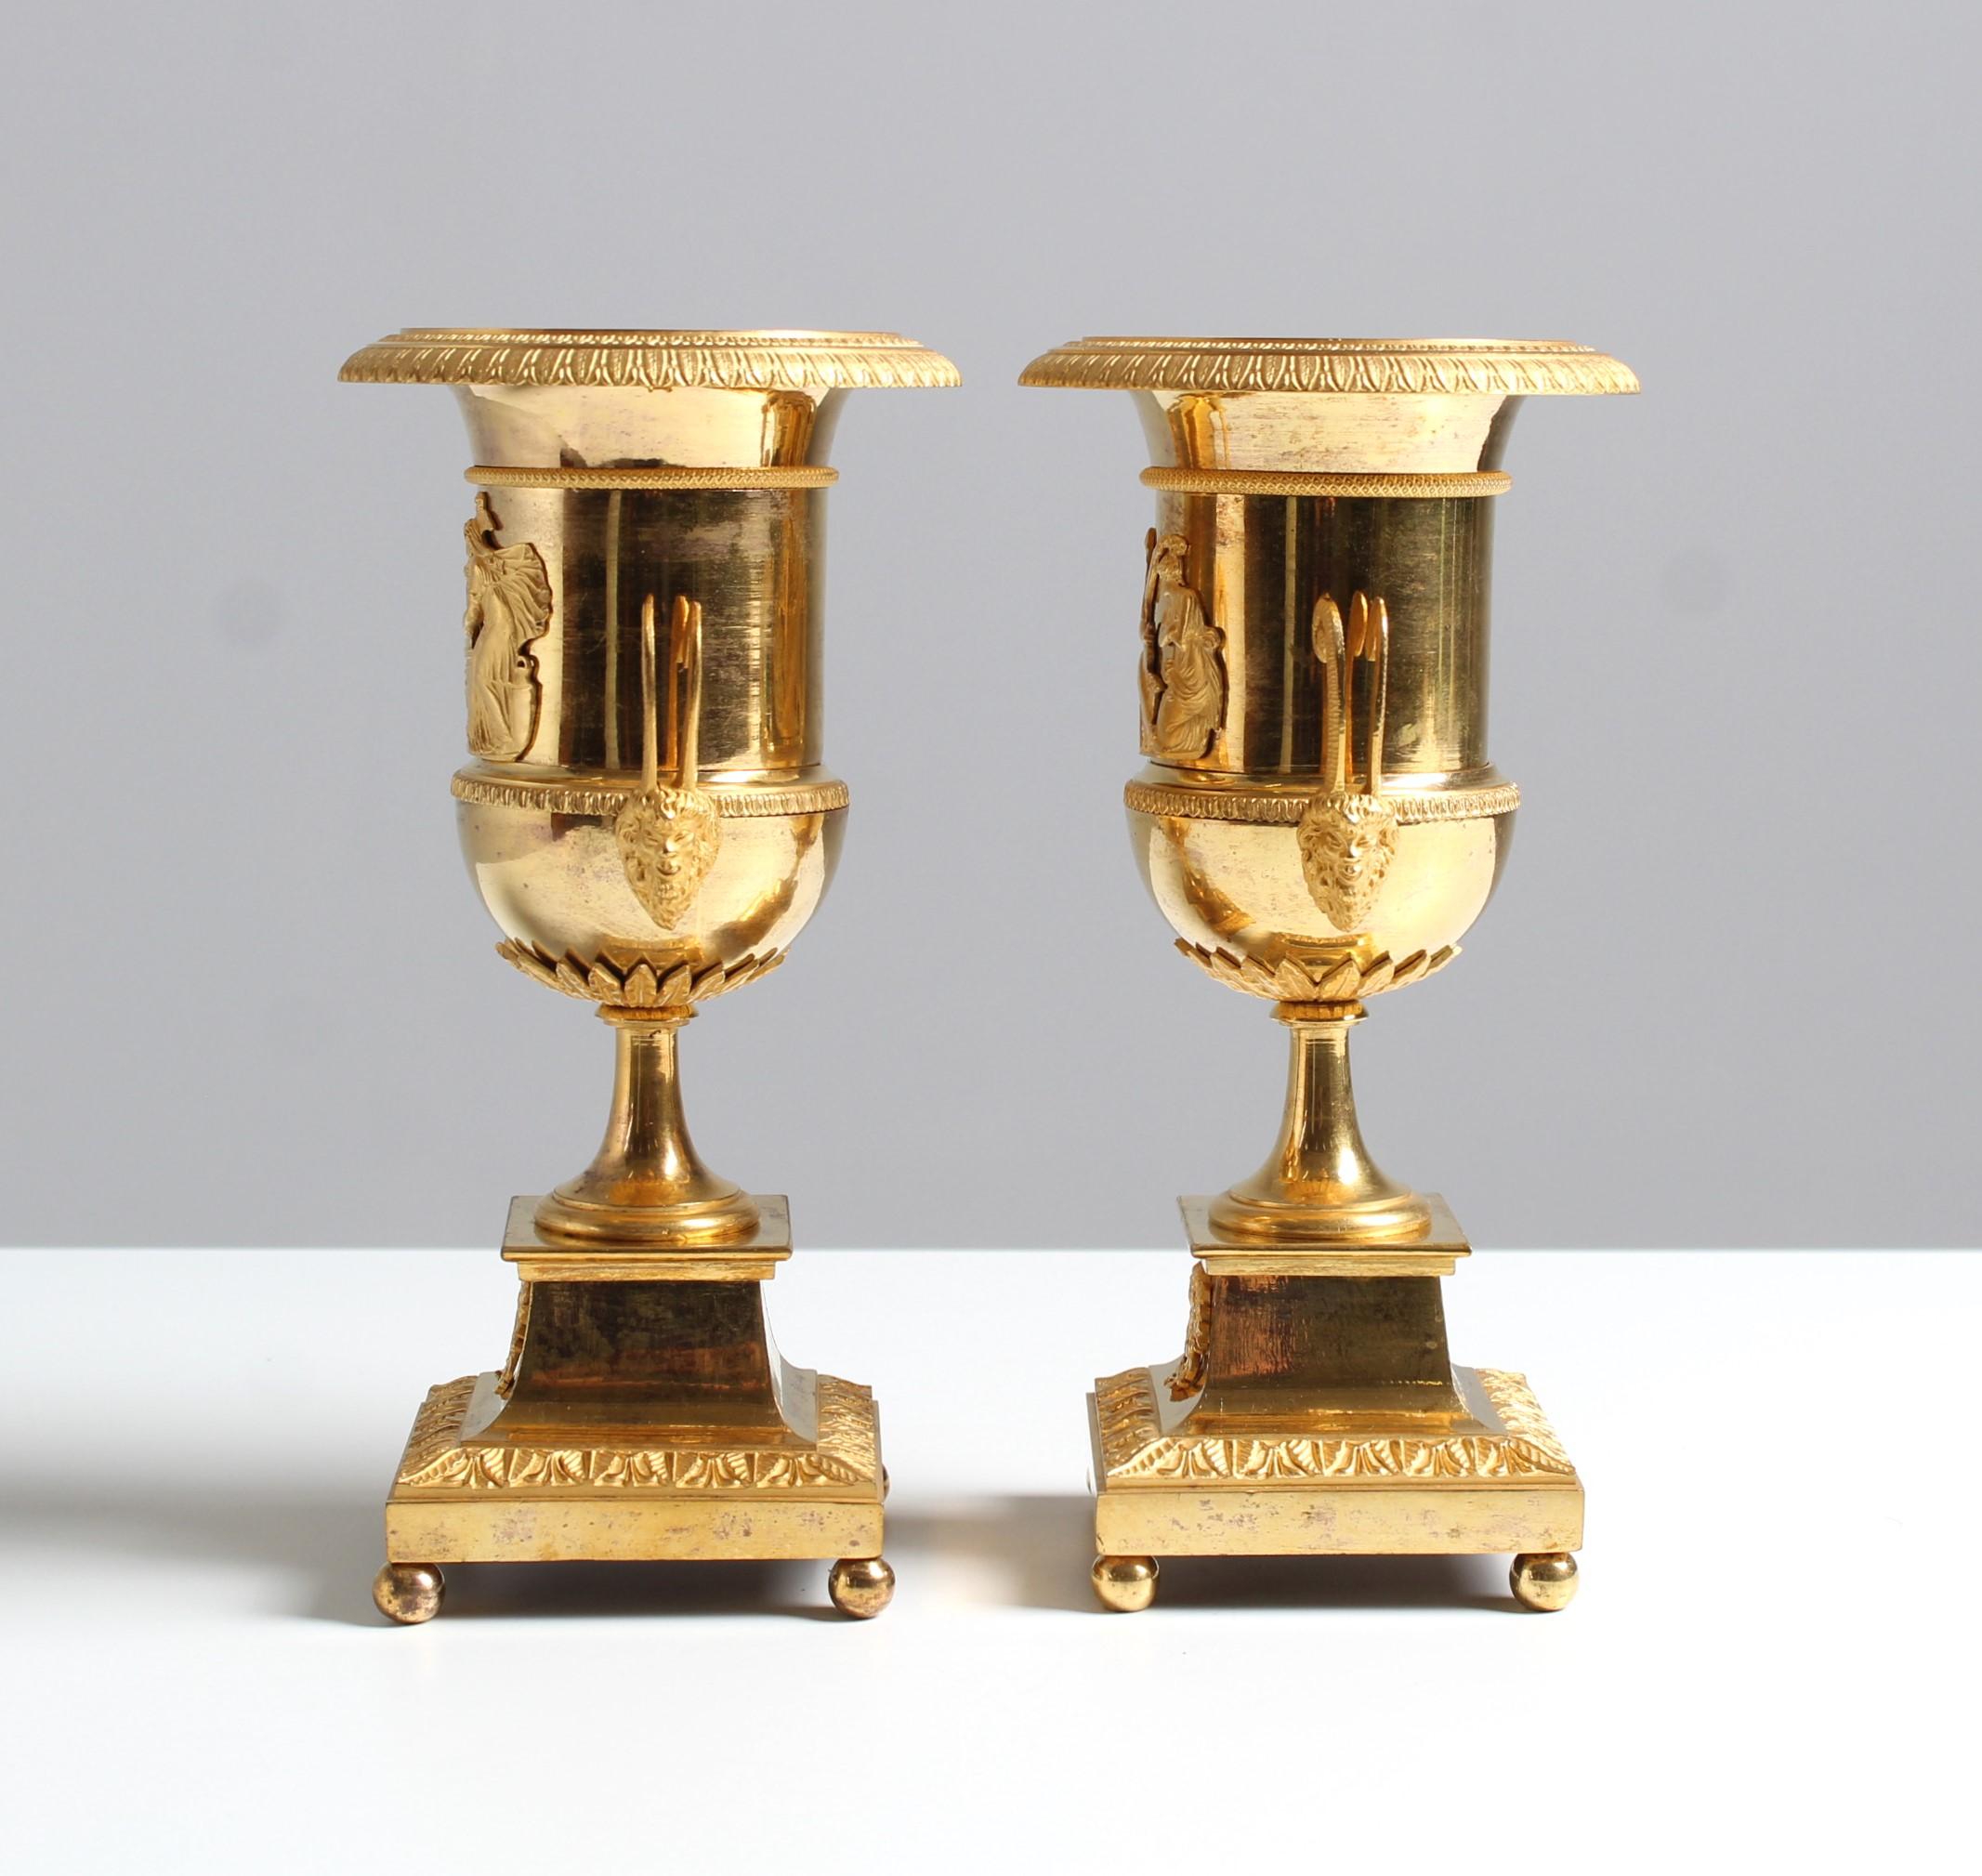 Pair of Empire vases

France
fire-gilt bronze
early 19th century

Dimensions: H x D: 23 x 12 cm

Description:
Pair of delicate French Empire vases or cassolettes.

The square bases stand on small ball feet and are decorated by palmette friezes all